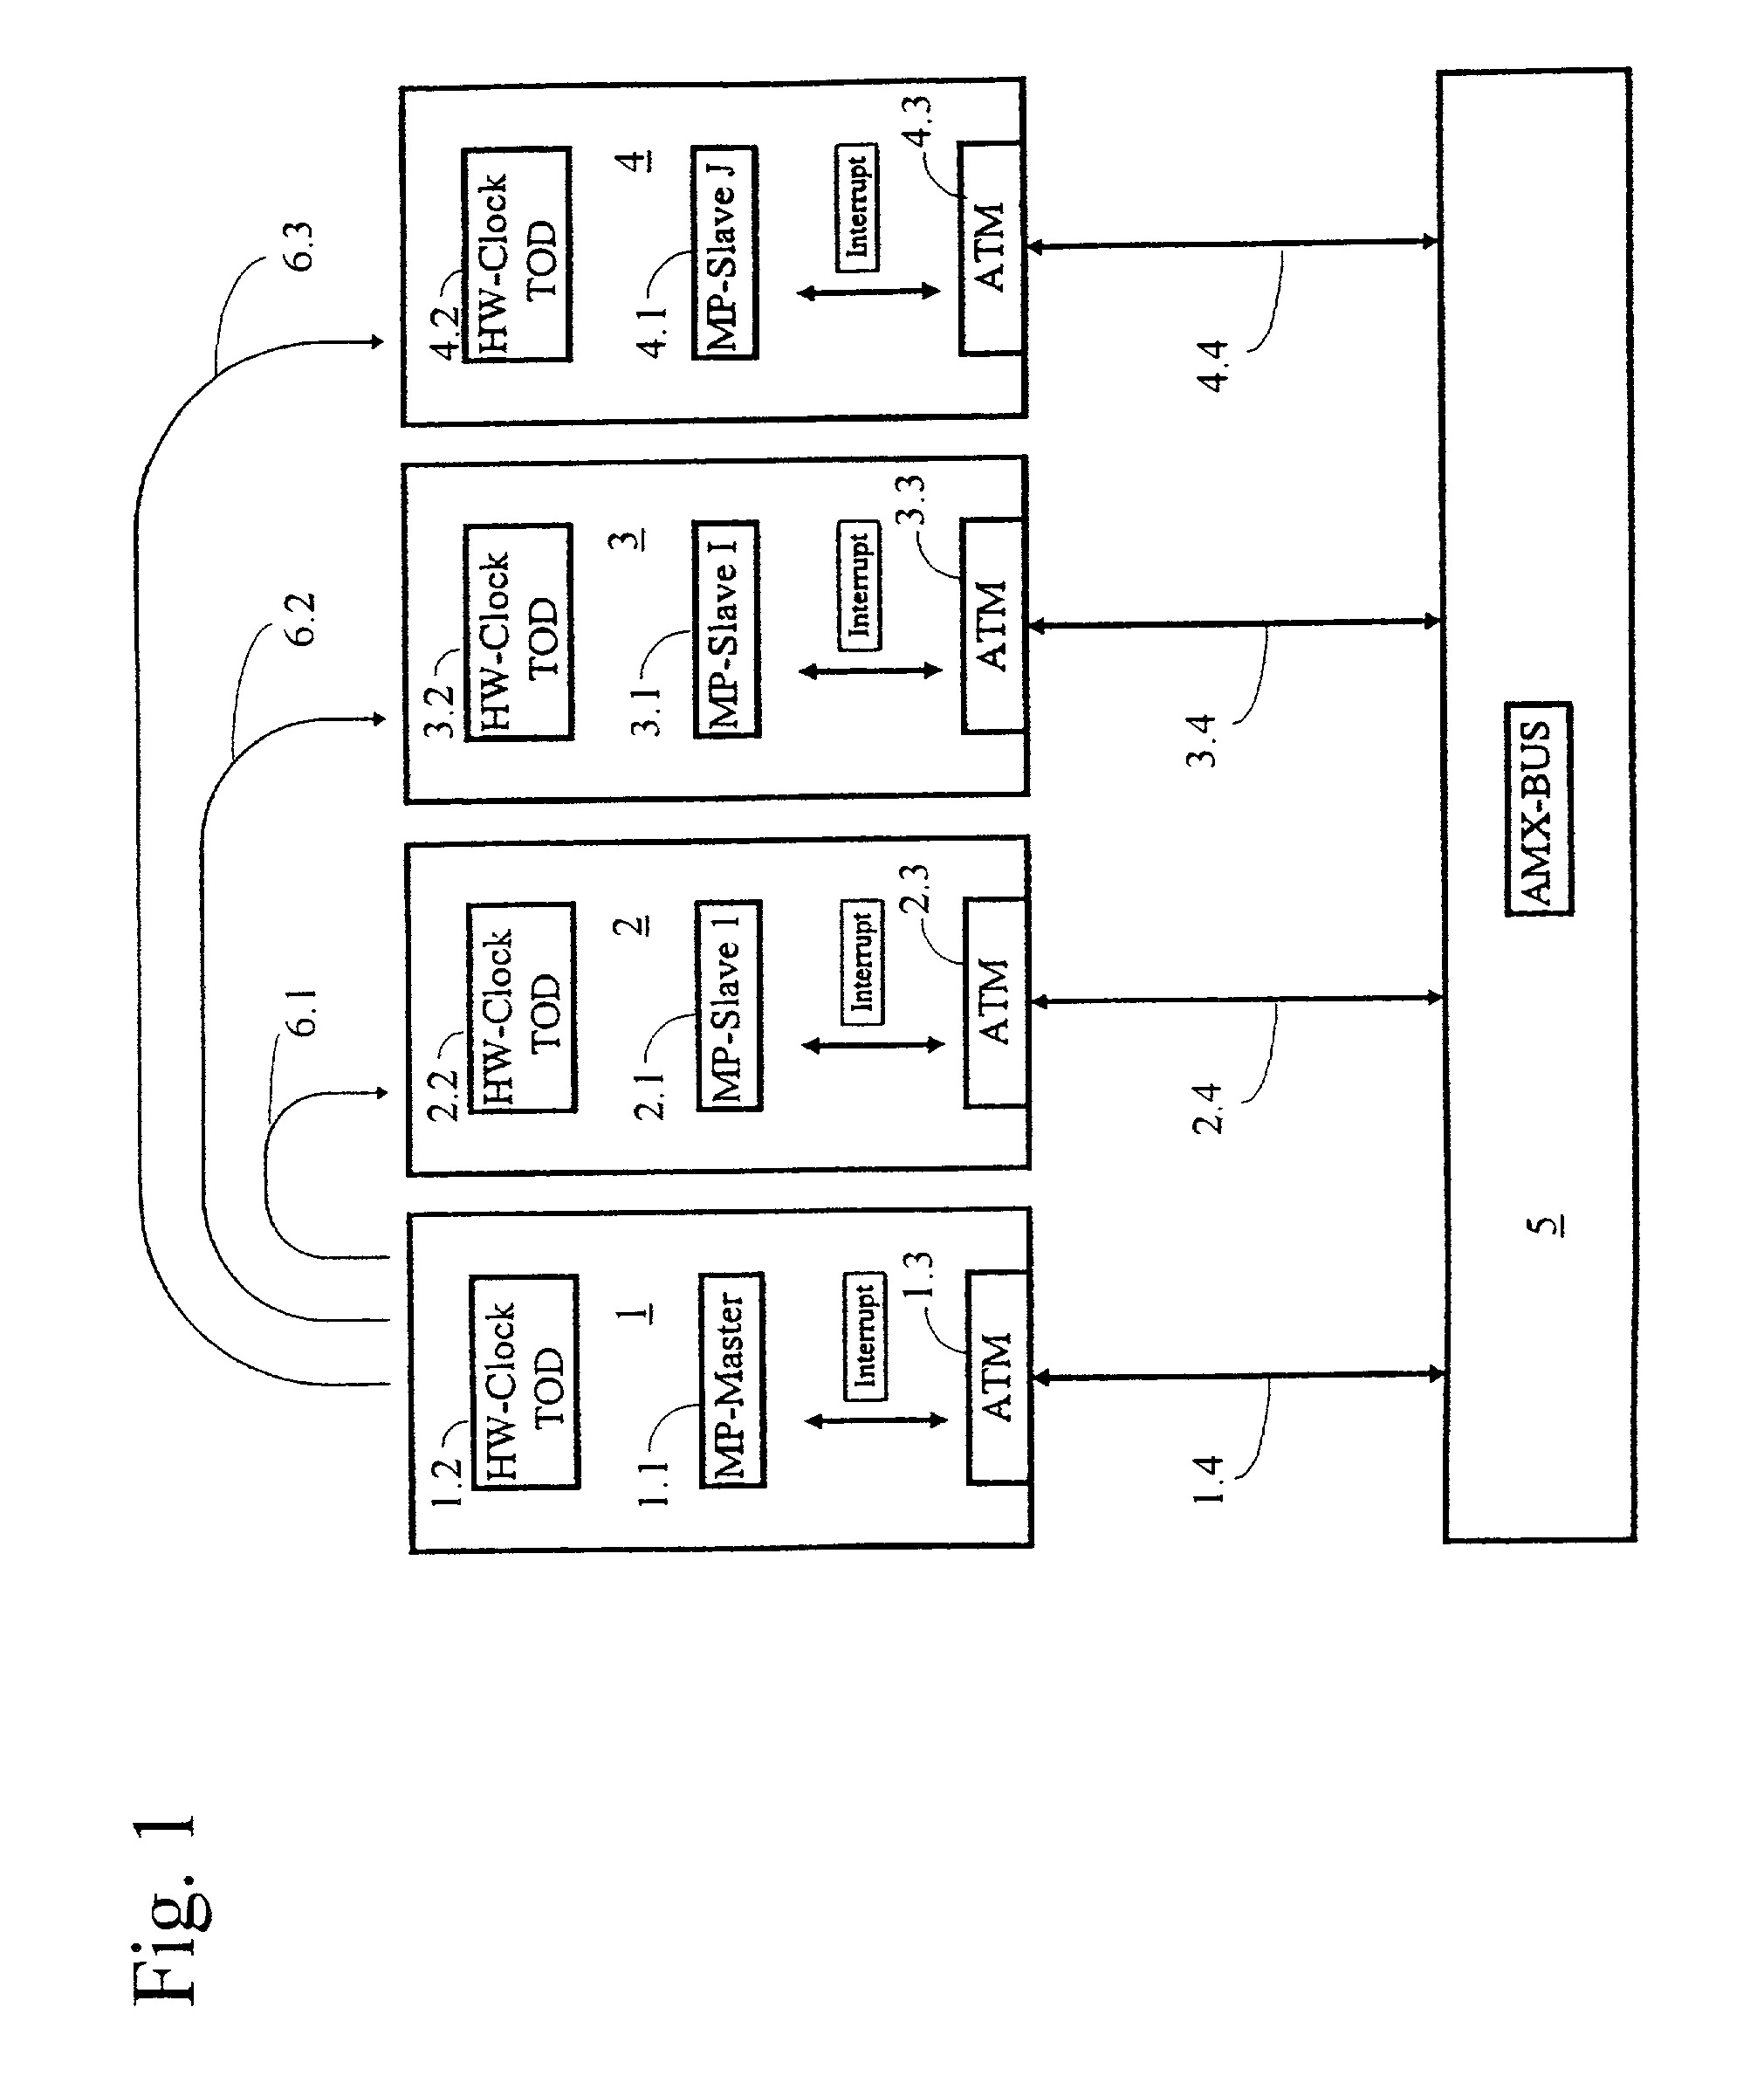 Method for time synchronization of a computer network, and computer network with time synchronization